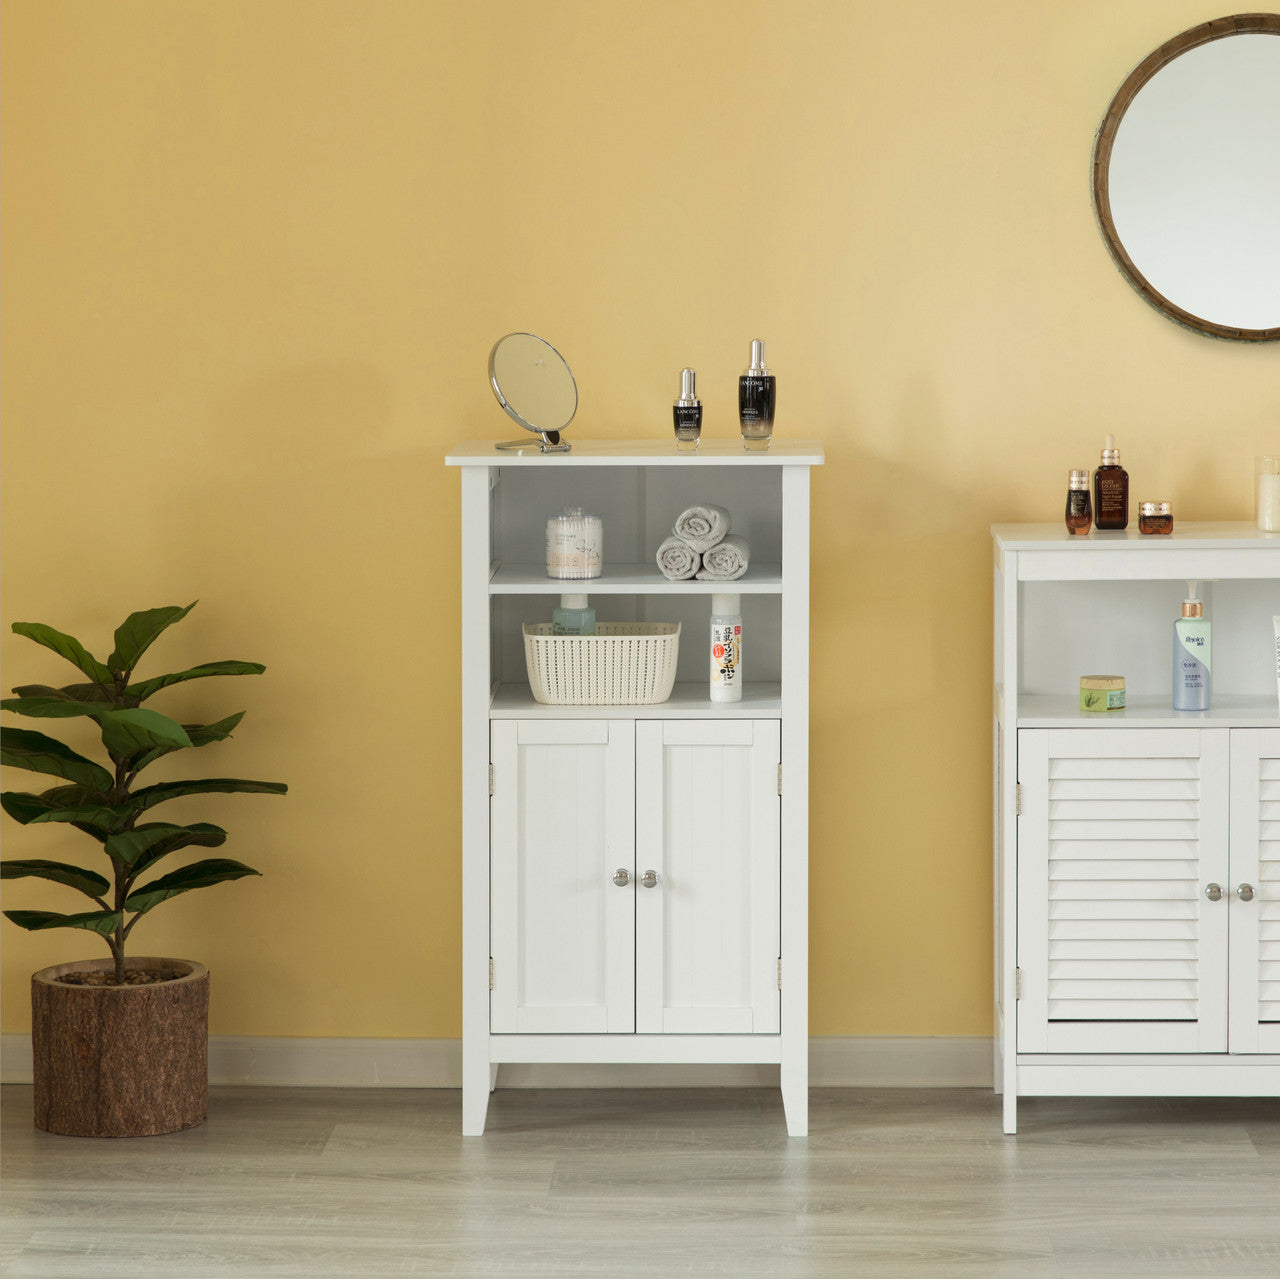 White Bathroom Storage Cabinet with 2 Doors and 2 Open Shelves for Bedroom, Bathroom, and Vanity - Almondscove